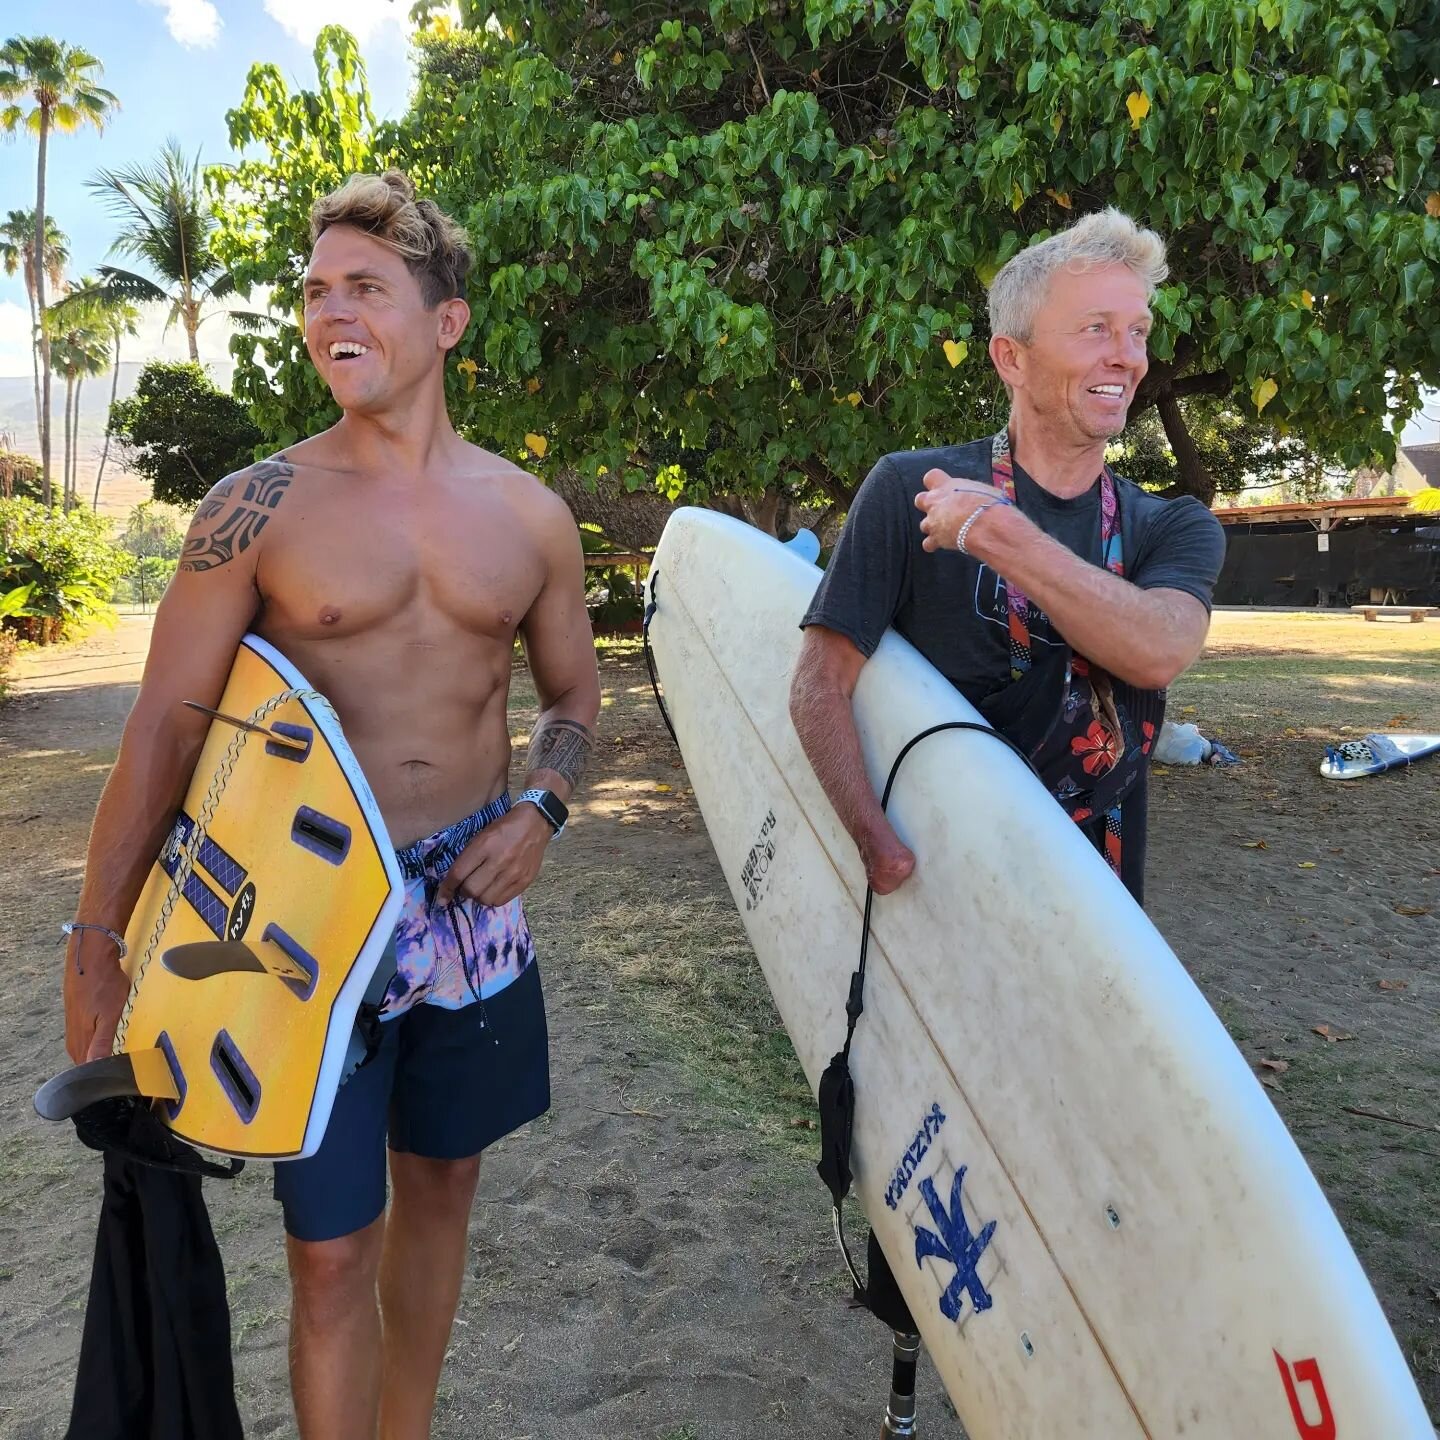 Throwback to a Maui training session with @bullyssurfschool last season. We rely heavily on support from the community. Thanks to everyone who helps make us better!
(ID: Josh and Aaron hold surfboards under their arms and smile looking away from the 